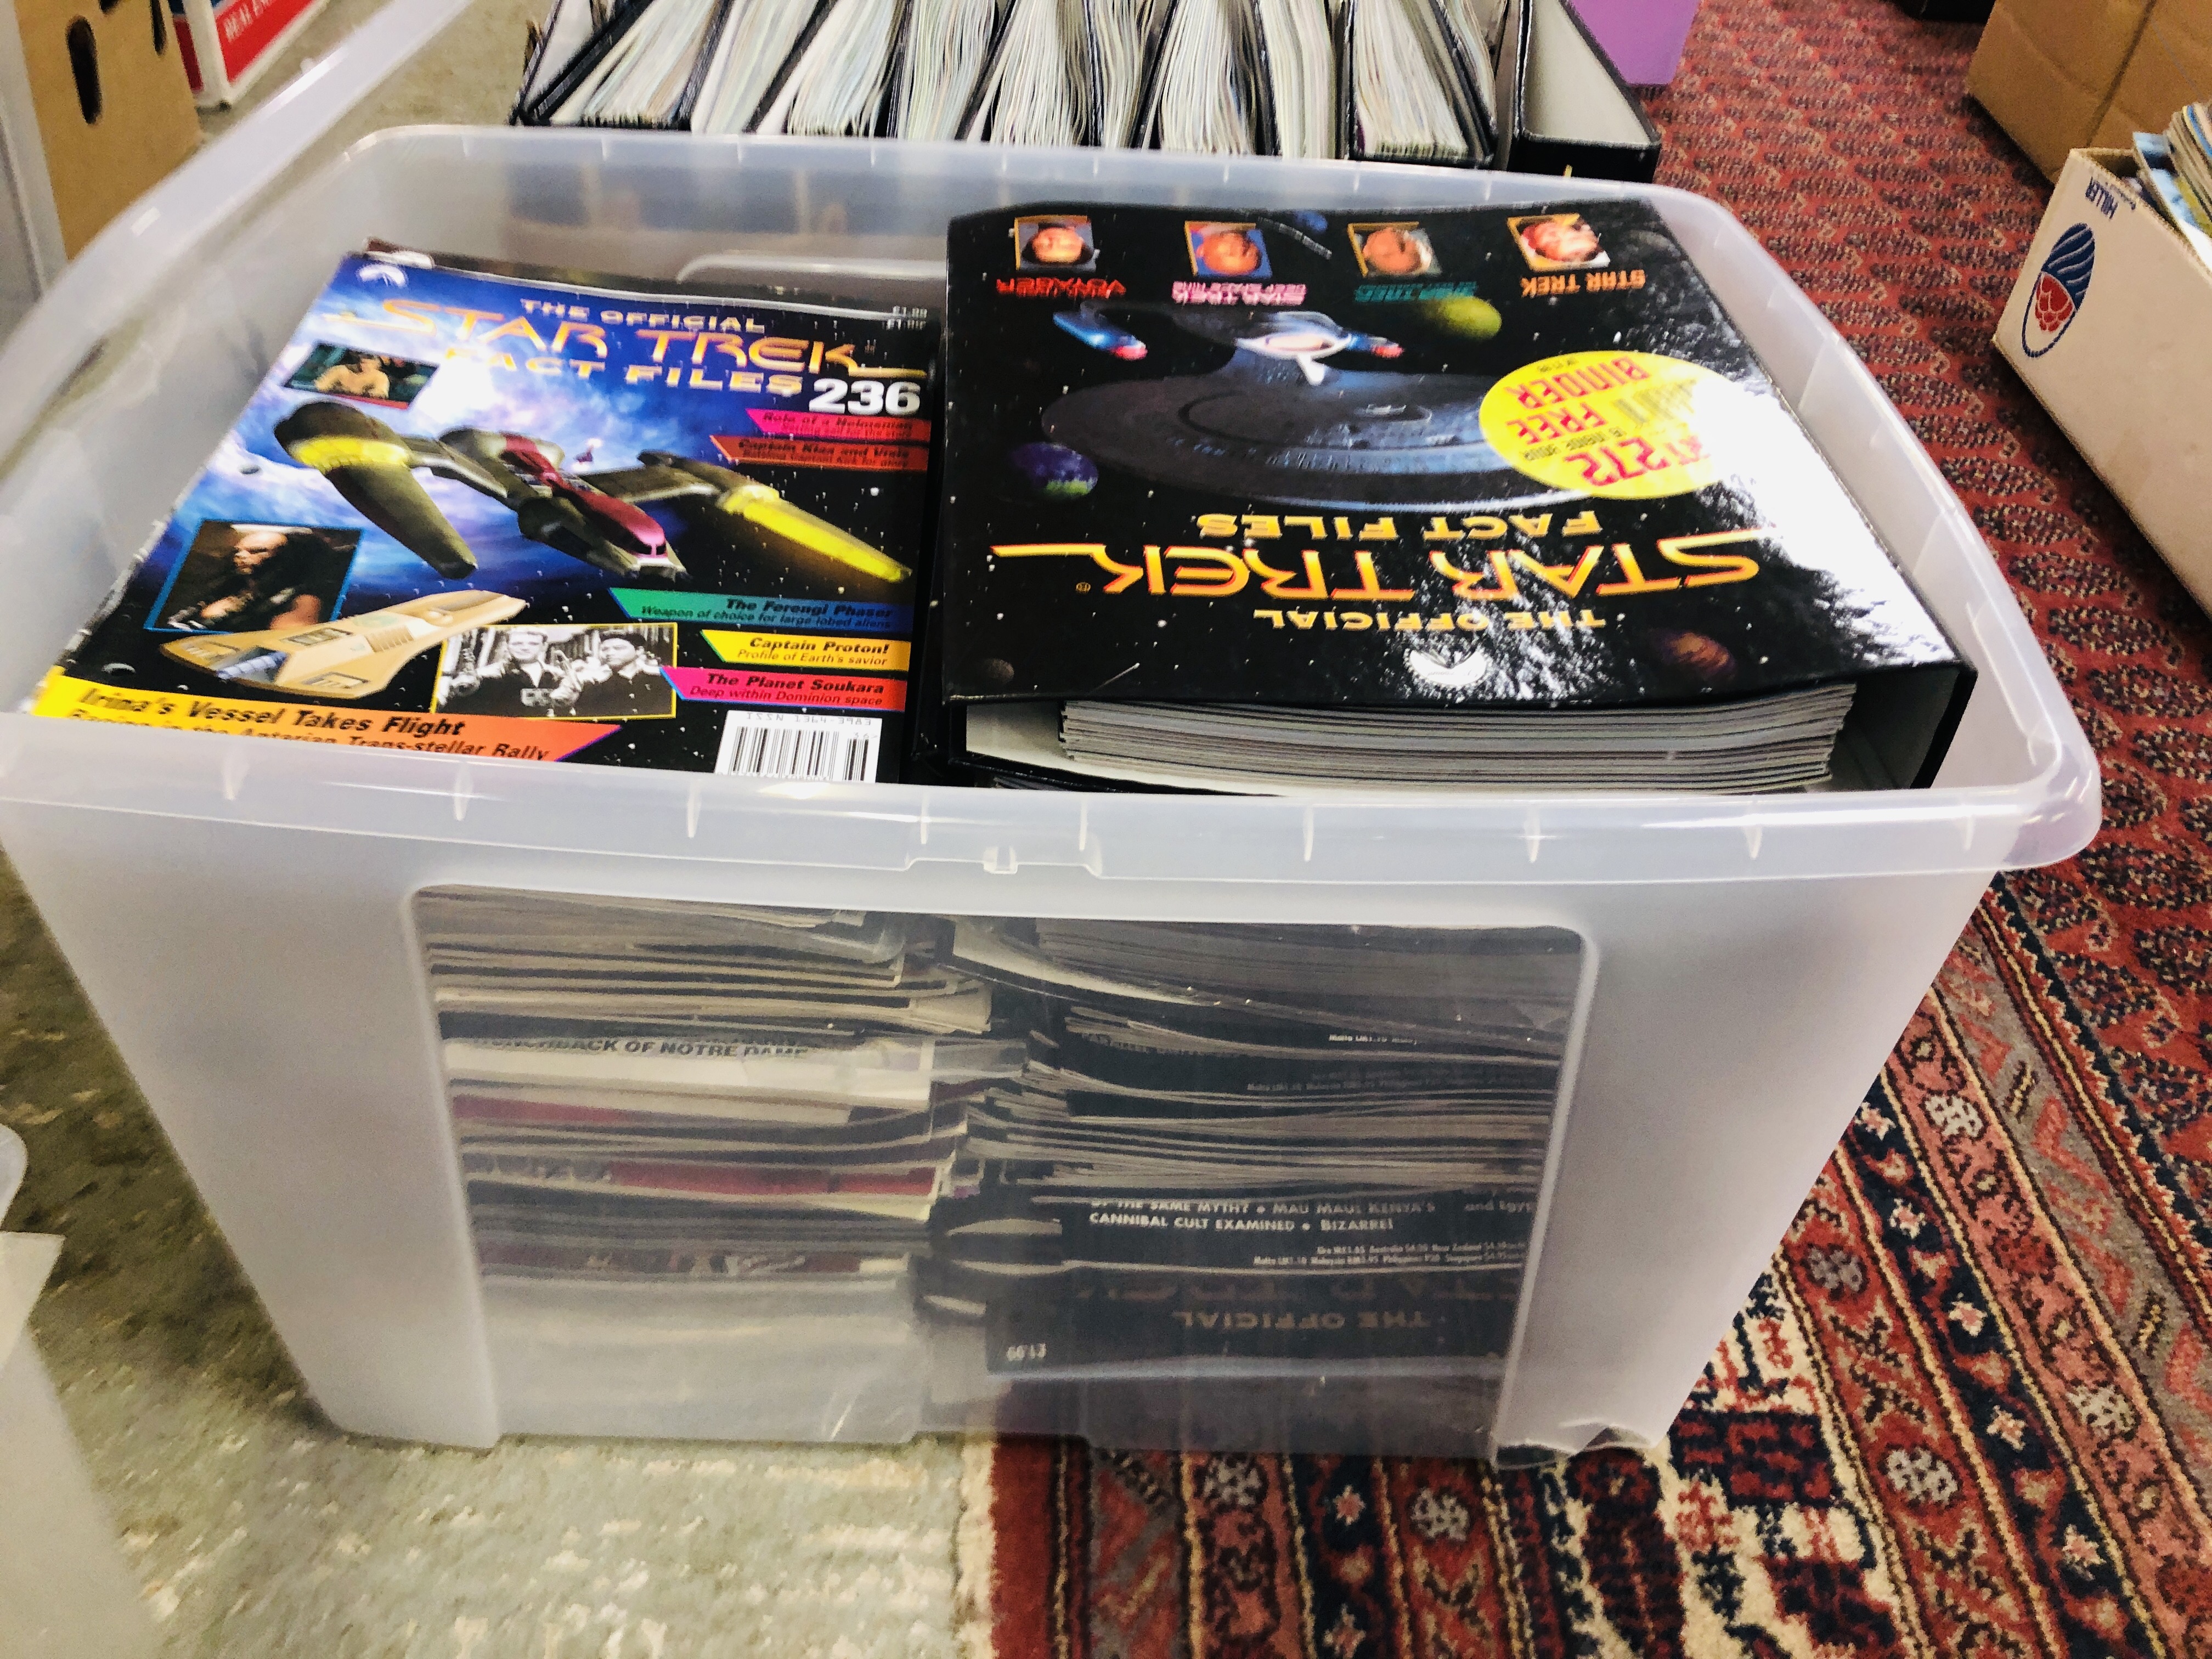 A LARGE COLLECTION OF STAR TREK FACT FILES ALONG WITH OTHER STAR TREK MAGAZINES, THE FINAL FRONTIER, - Image 4 of 7